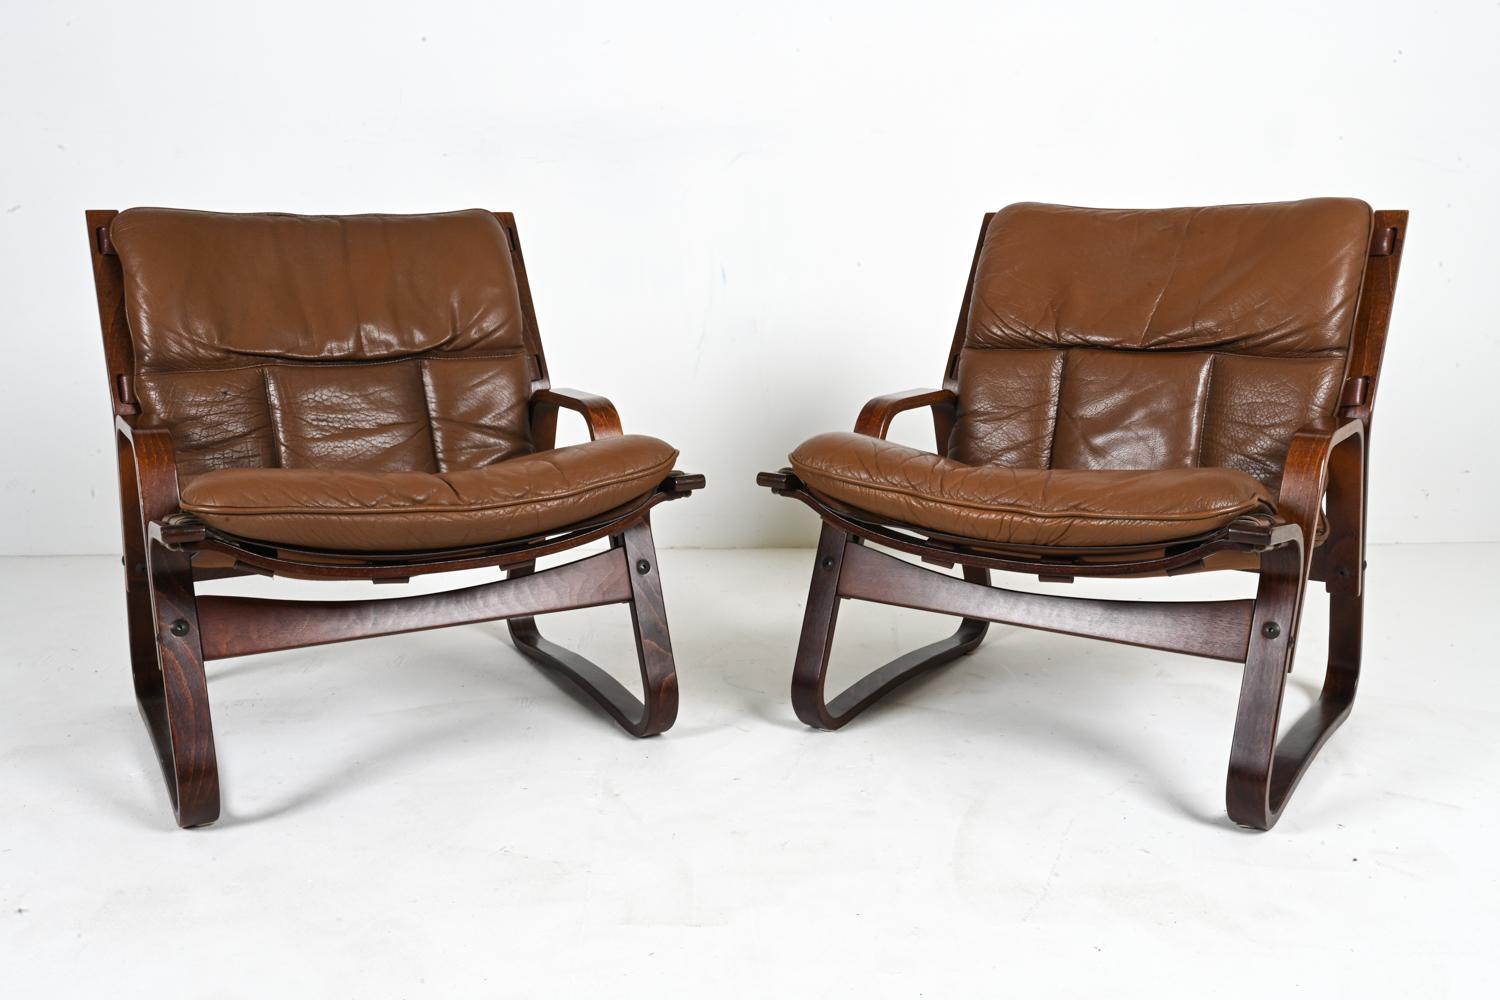 Live out your 1970's bungalow dreams with this rare pair of Norwegian Modern lounge chairs designed by Giske Carlsen for Kleppe Møbelfabrik. Crafted from bent beechwood, the sturdy frames are finished in a rich rosewood-mahogany stain, with